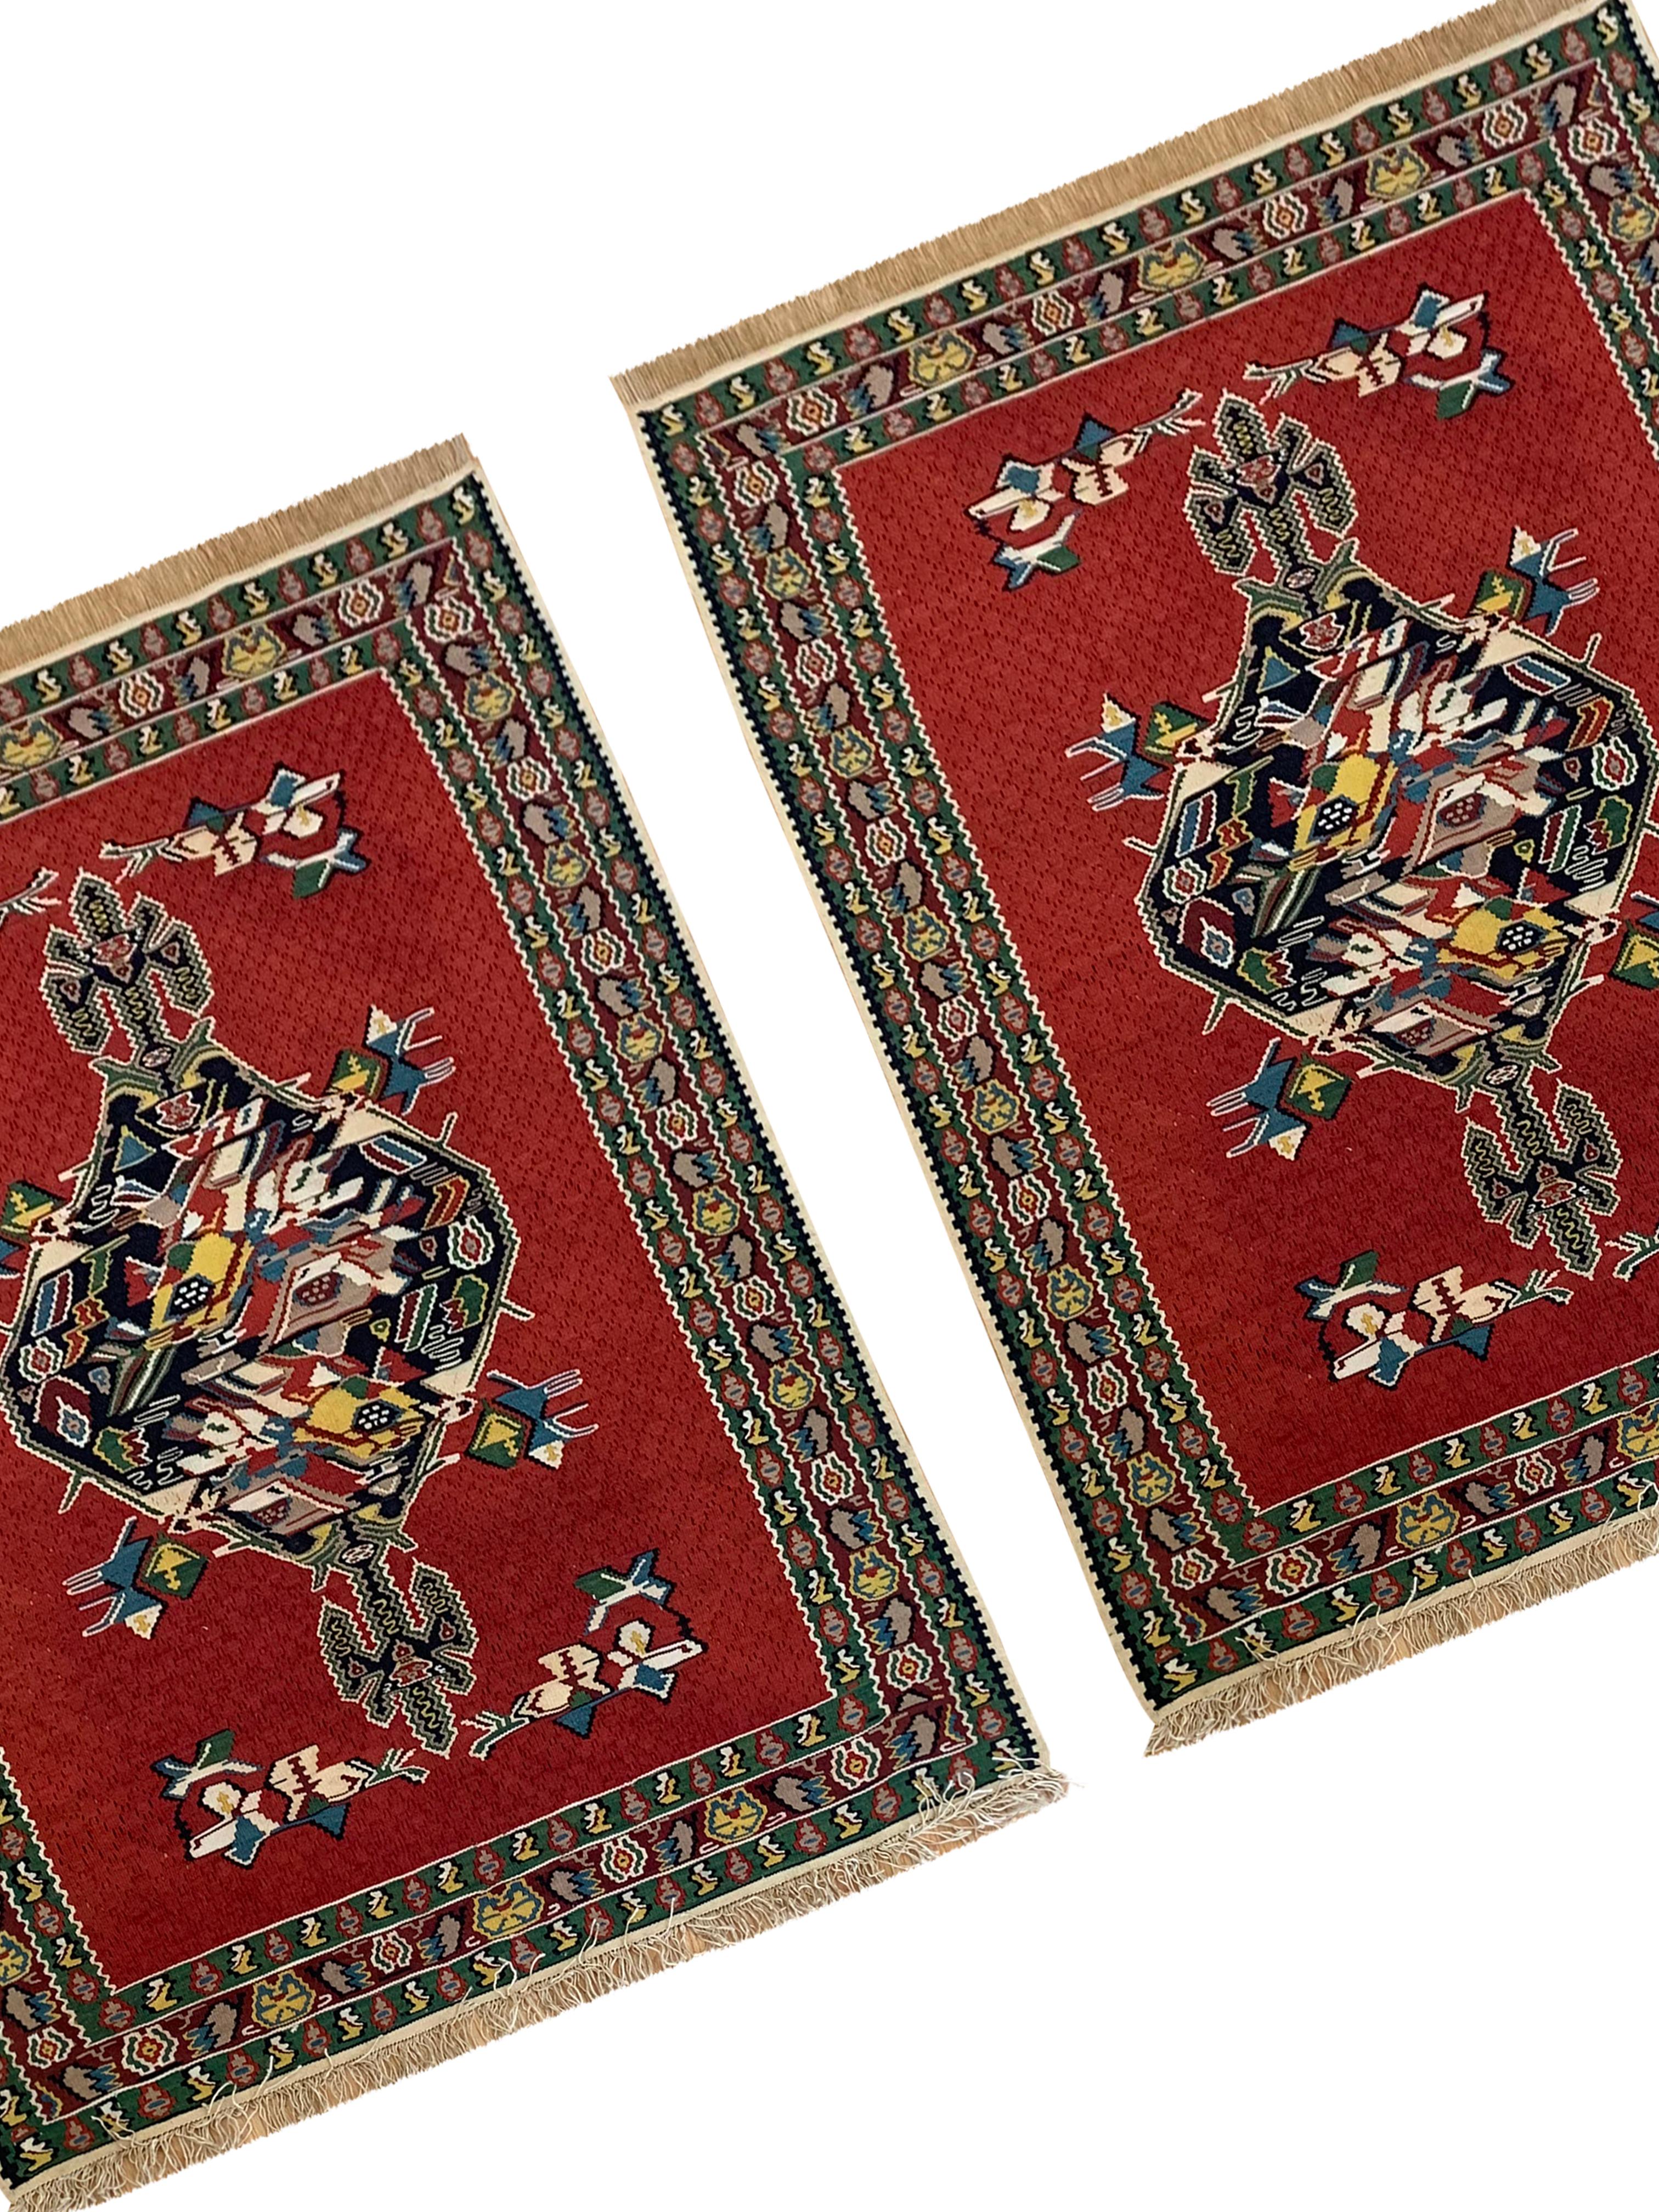 Pair of Red Silk and Wool Kilim Rugs Handmade Geometric Area Rugs For Sale 11